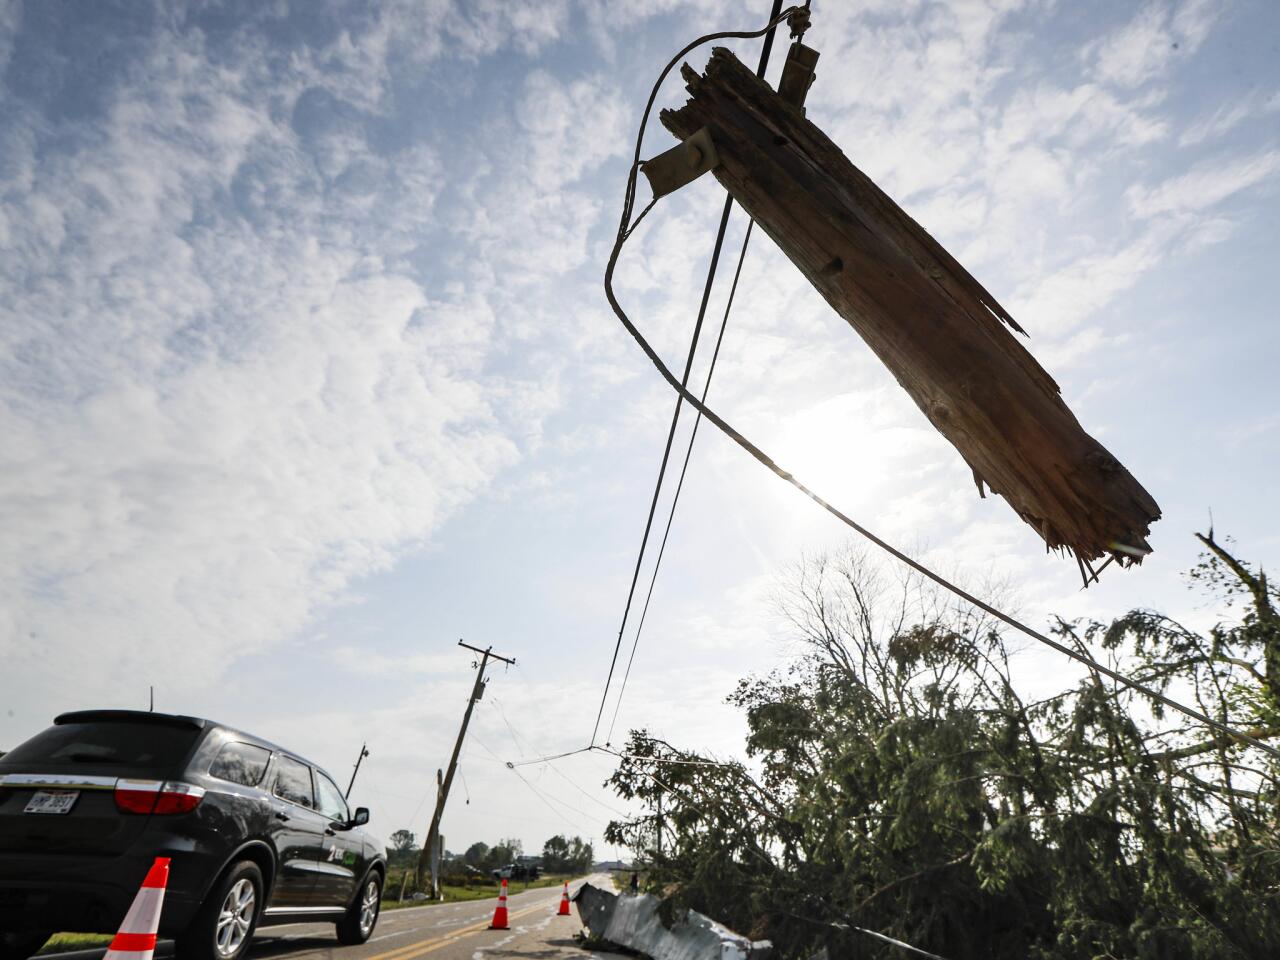 Tornadoes leave trail of destruction across Ohio and Indiana